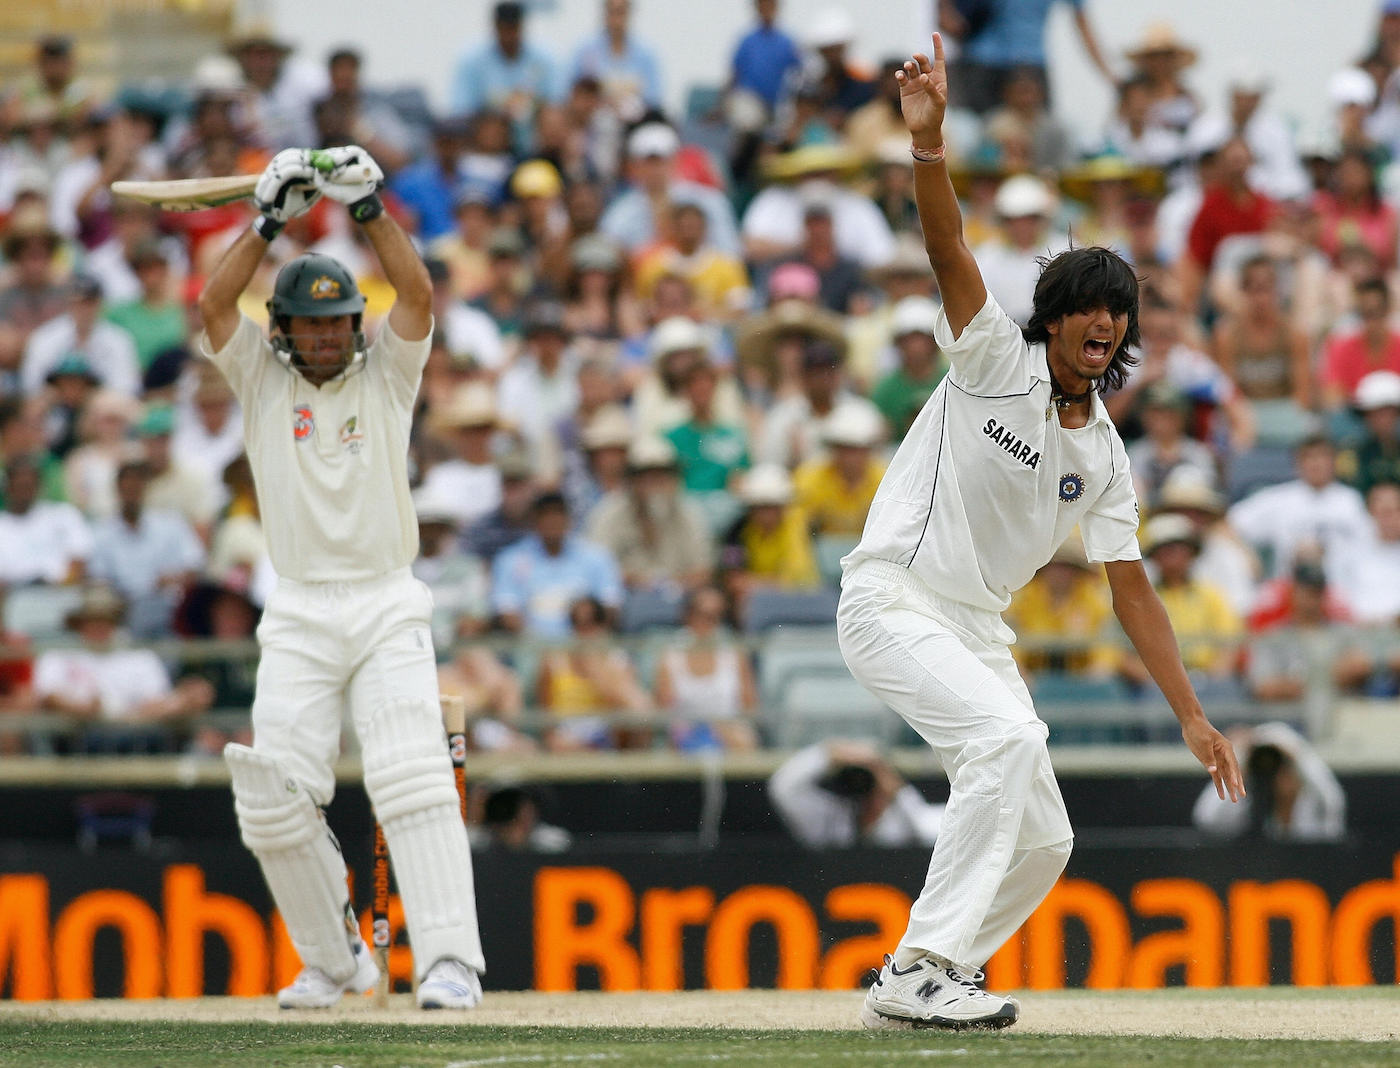 Ishant Sharma unsuccessfully appeals for lbw after Ricky Ponting fails to offer a shot, Australia v India, 3rd Test, Perth, 4th day, January 19, 2008